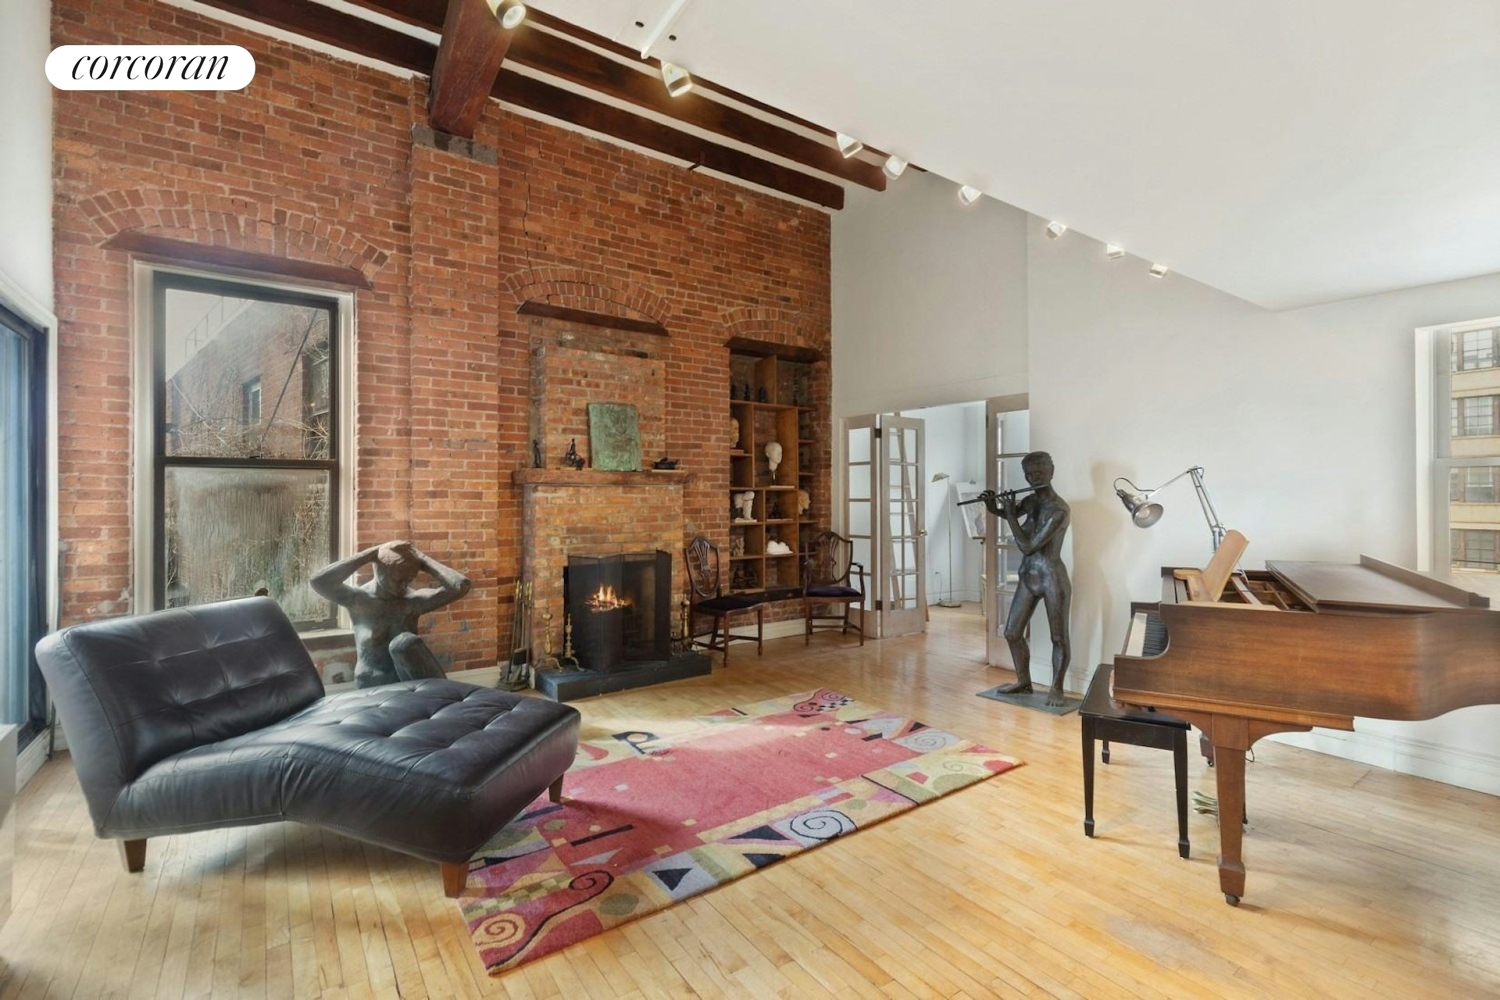 35 Bethune Street Phd, West Village, Downtown, NYC - 2 Bedrooms  
2 Bathrooms  
6 Rooms - 